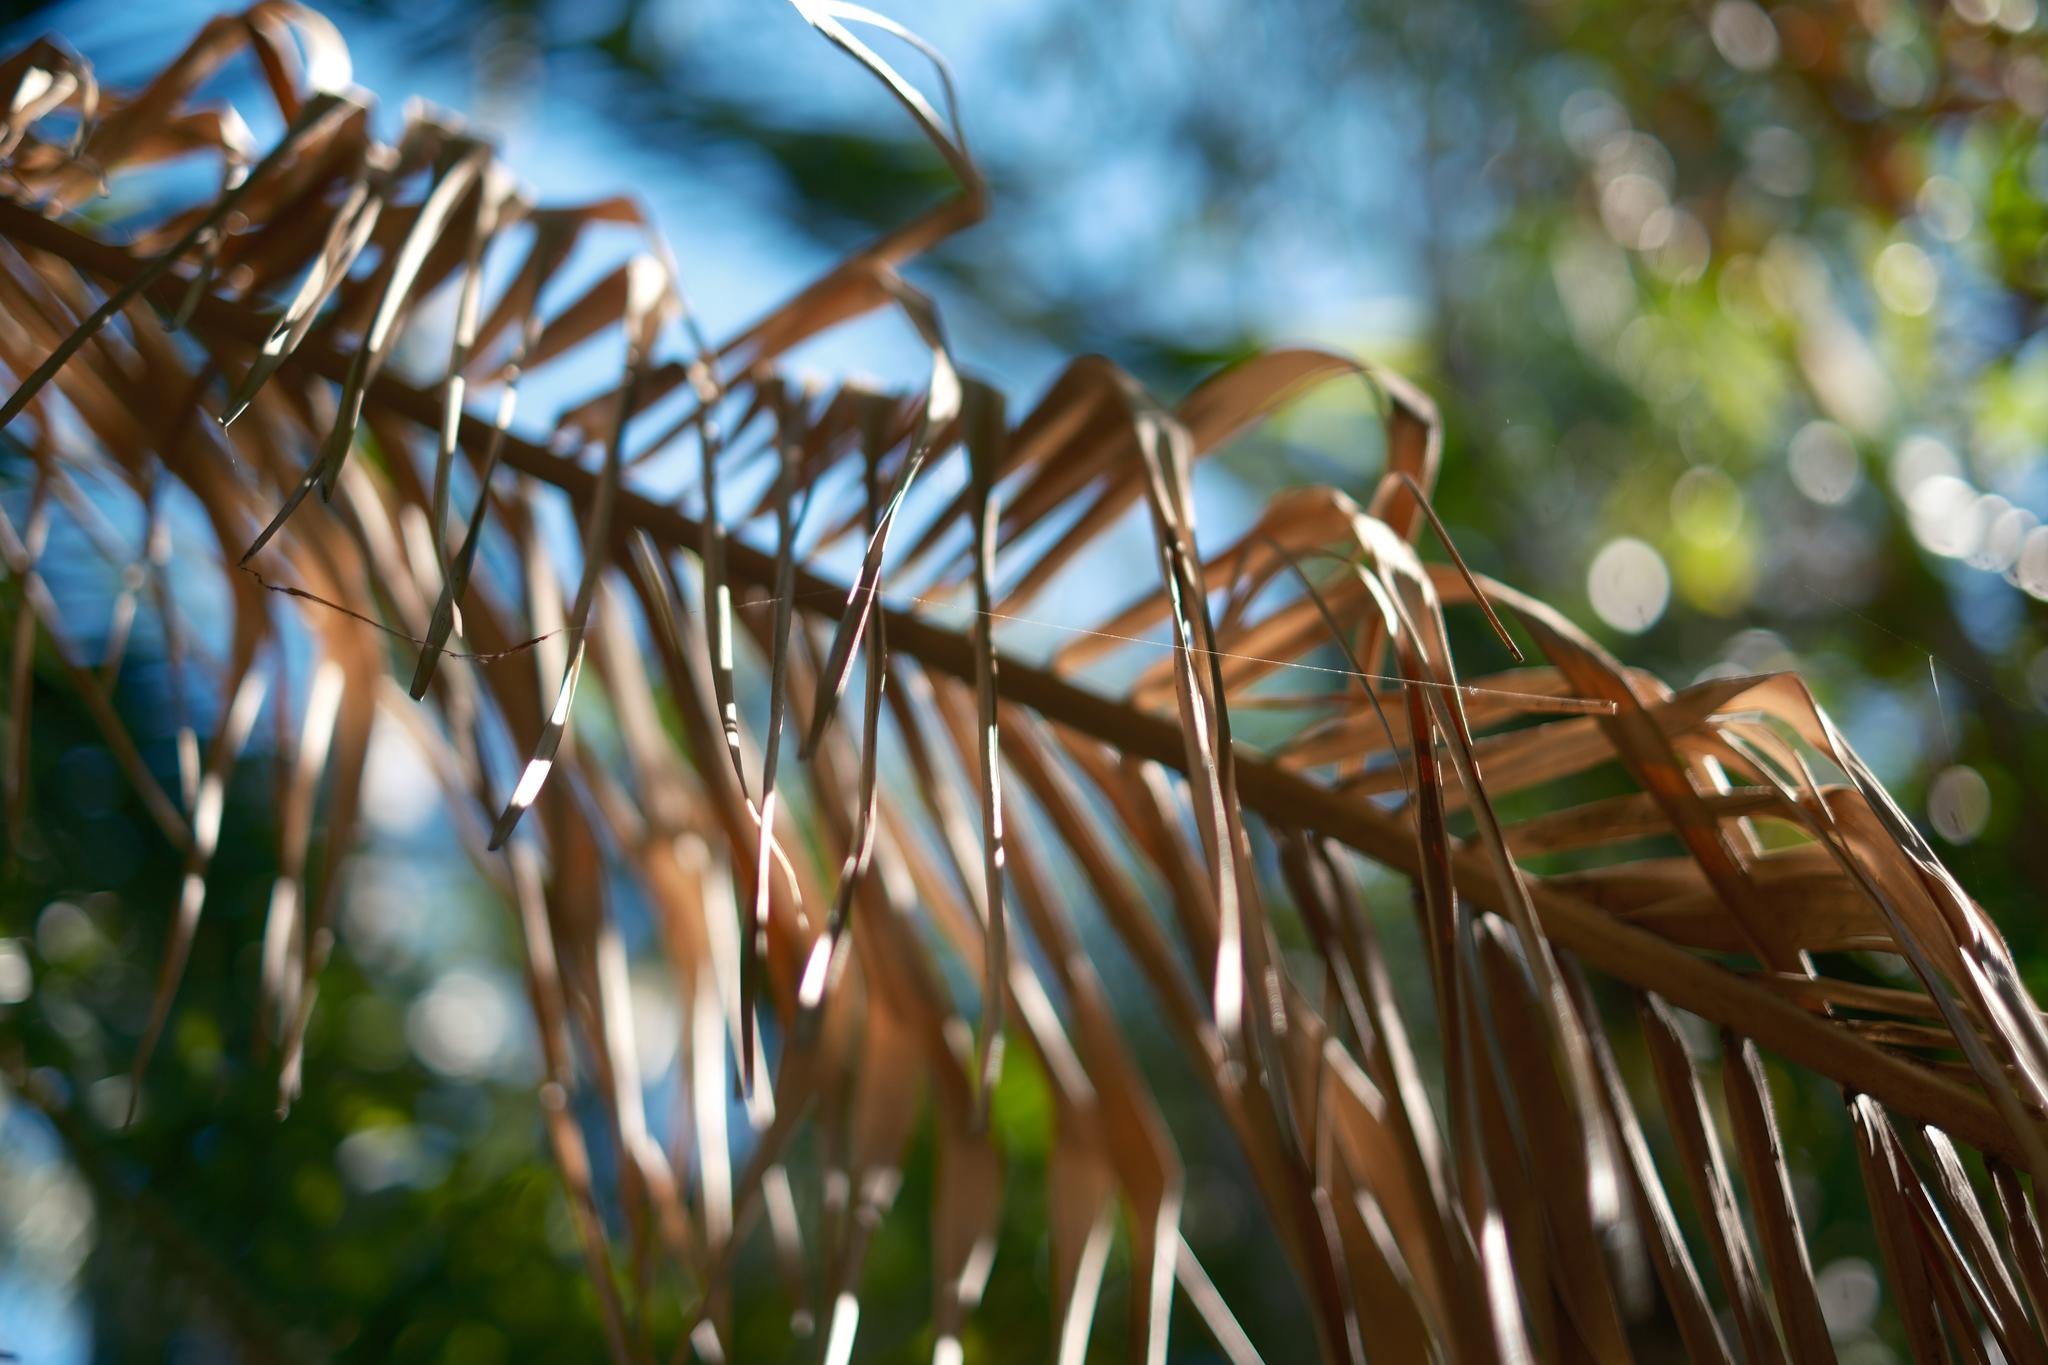 A close-up of a dried, brown palm frond with a blurred green and blue background